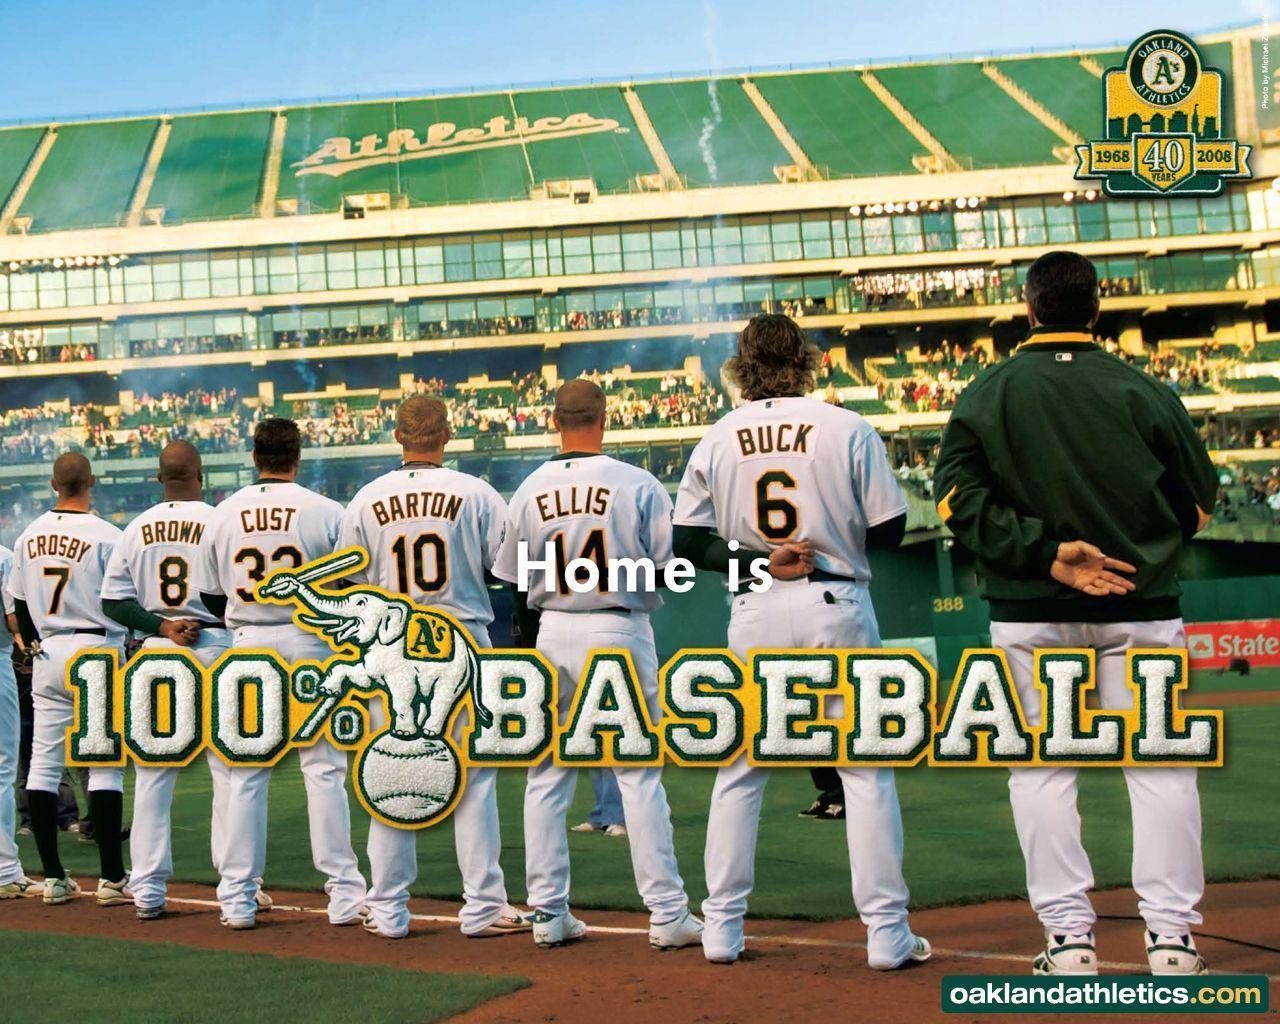 Best image about Oakland A's. Champs, World